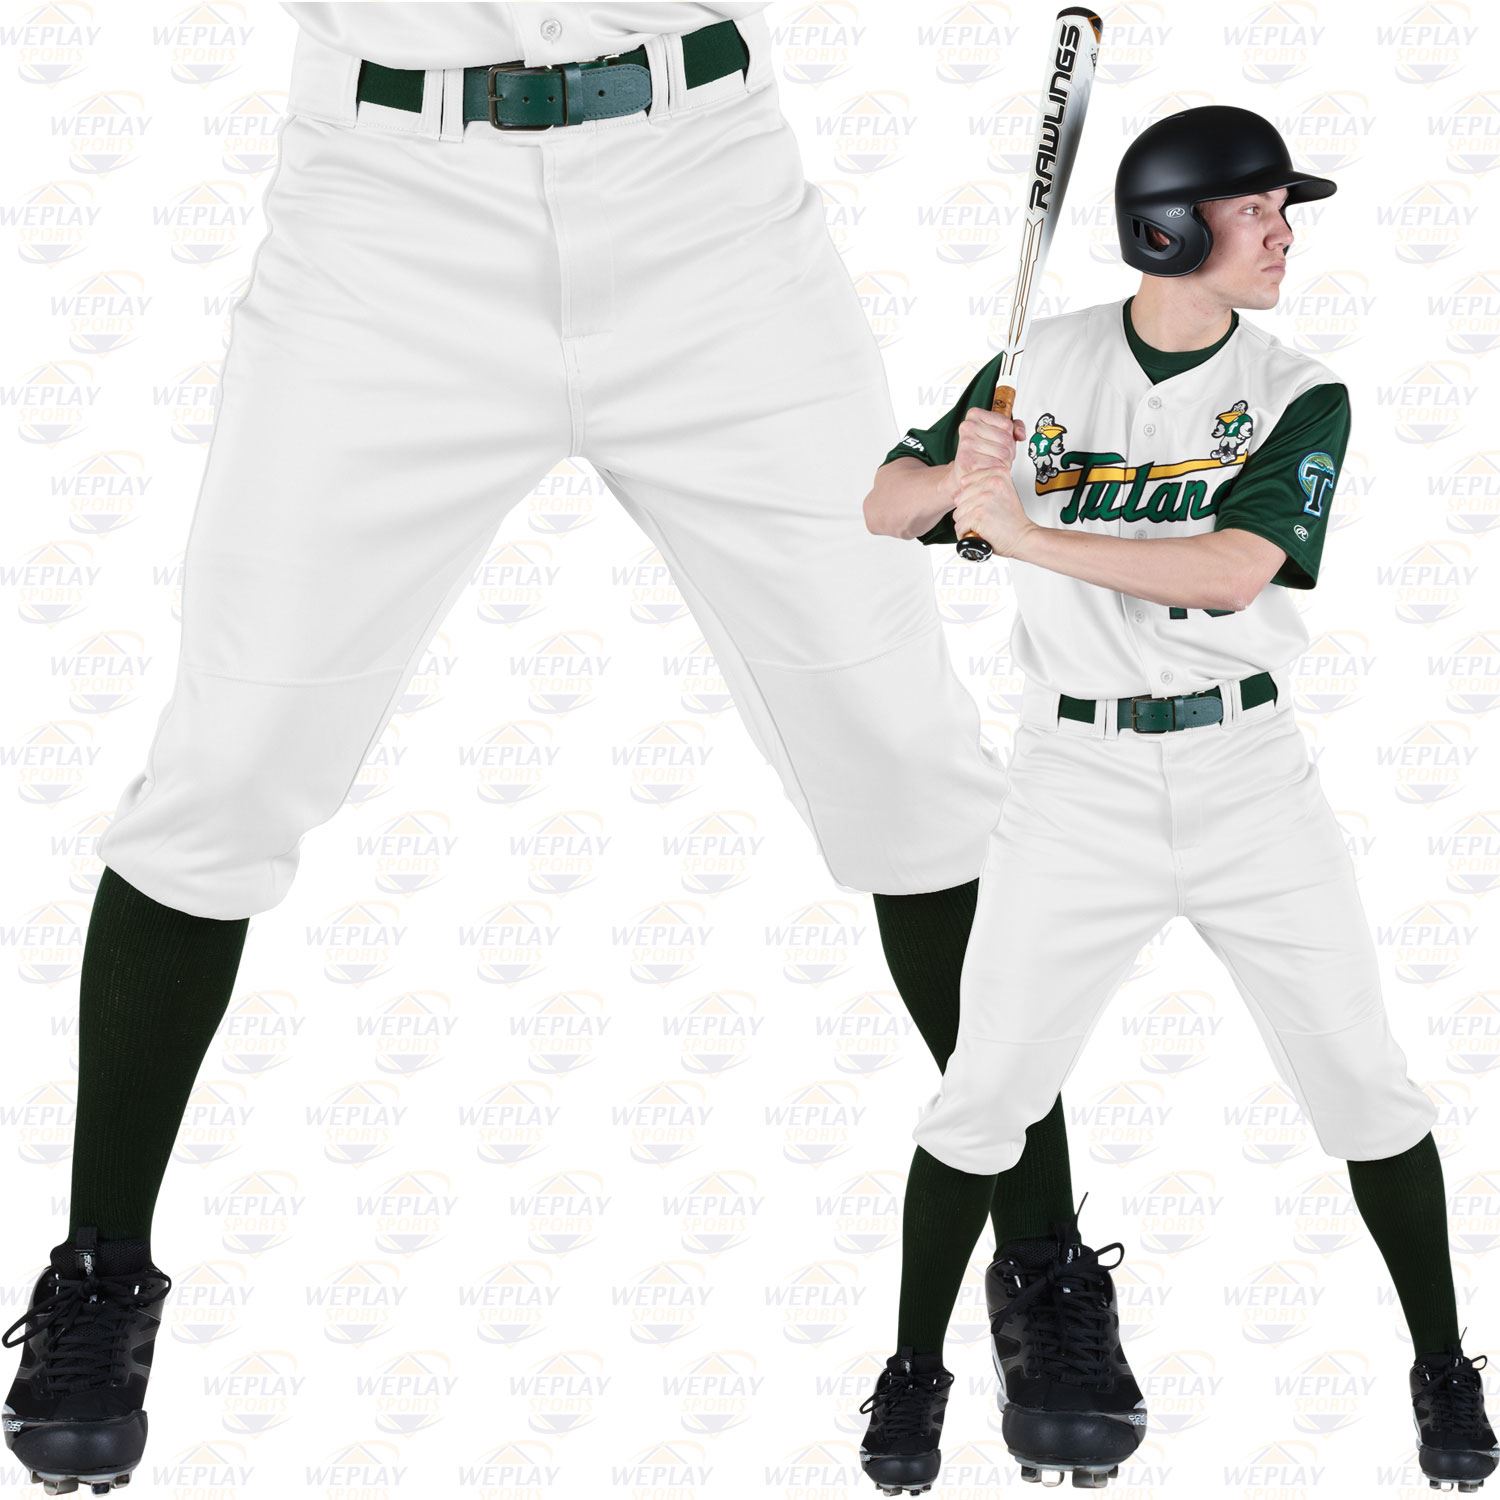 White Details about   Rawlings  Men's Knee-High Pants Large 